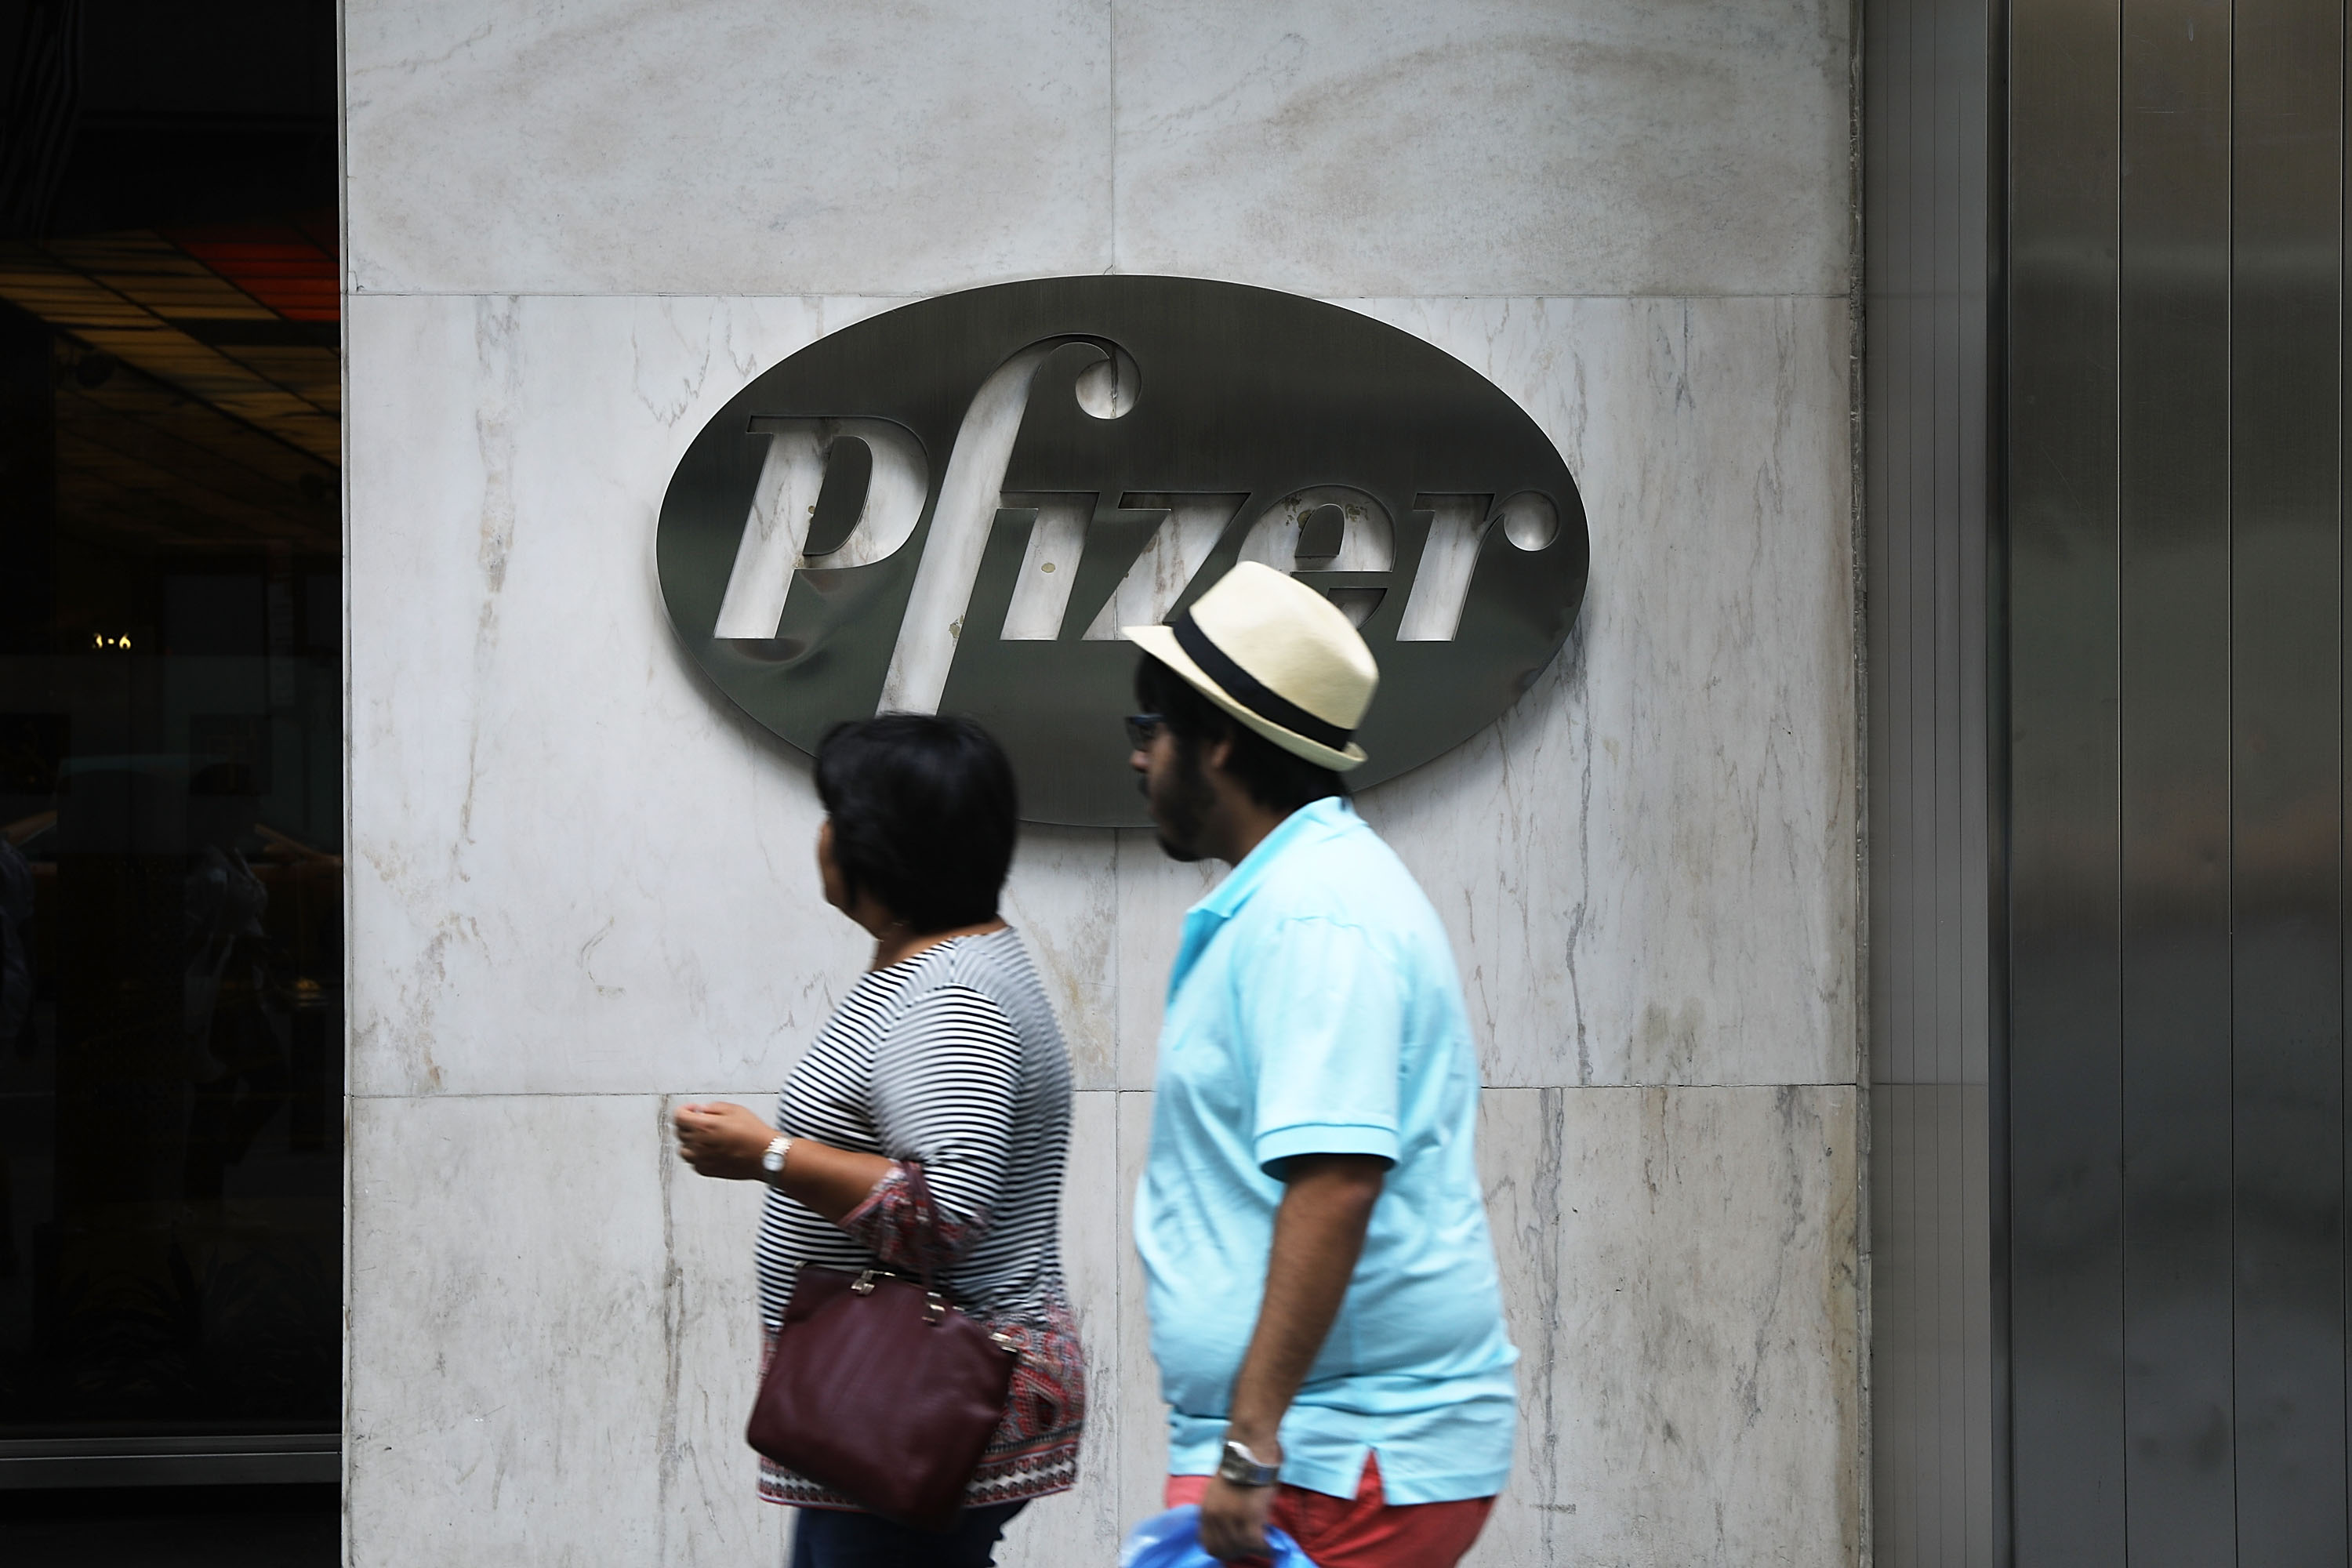 People pass the Pfizer headquarters in Manhattan on July 11, 2018 in New York City. (Photo by Spencer Platt/Getty Images)